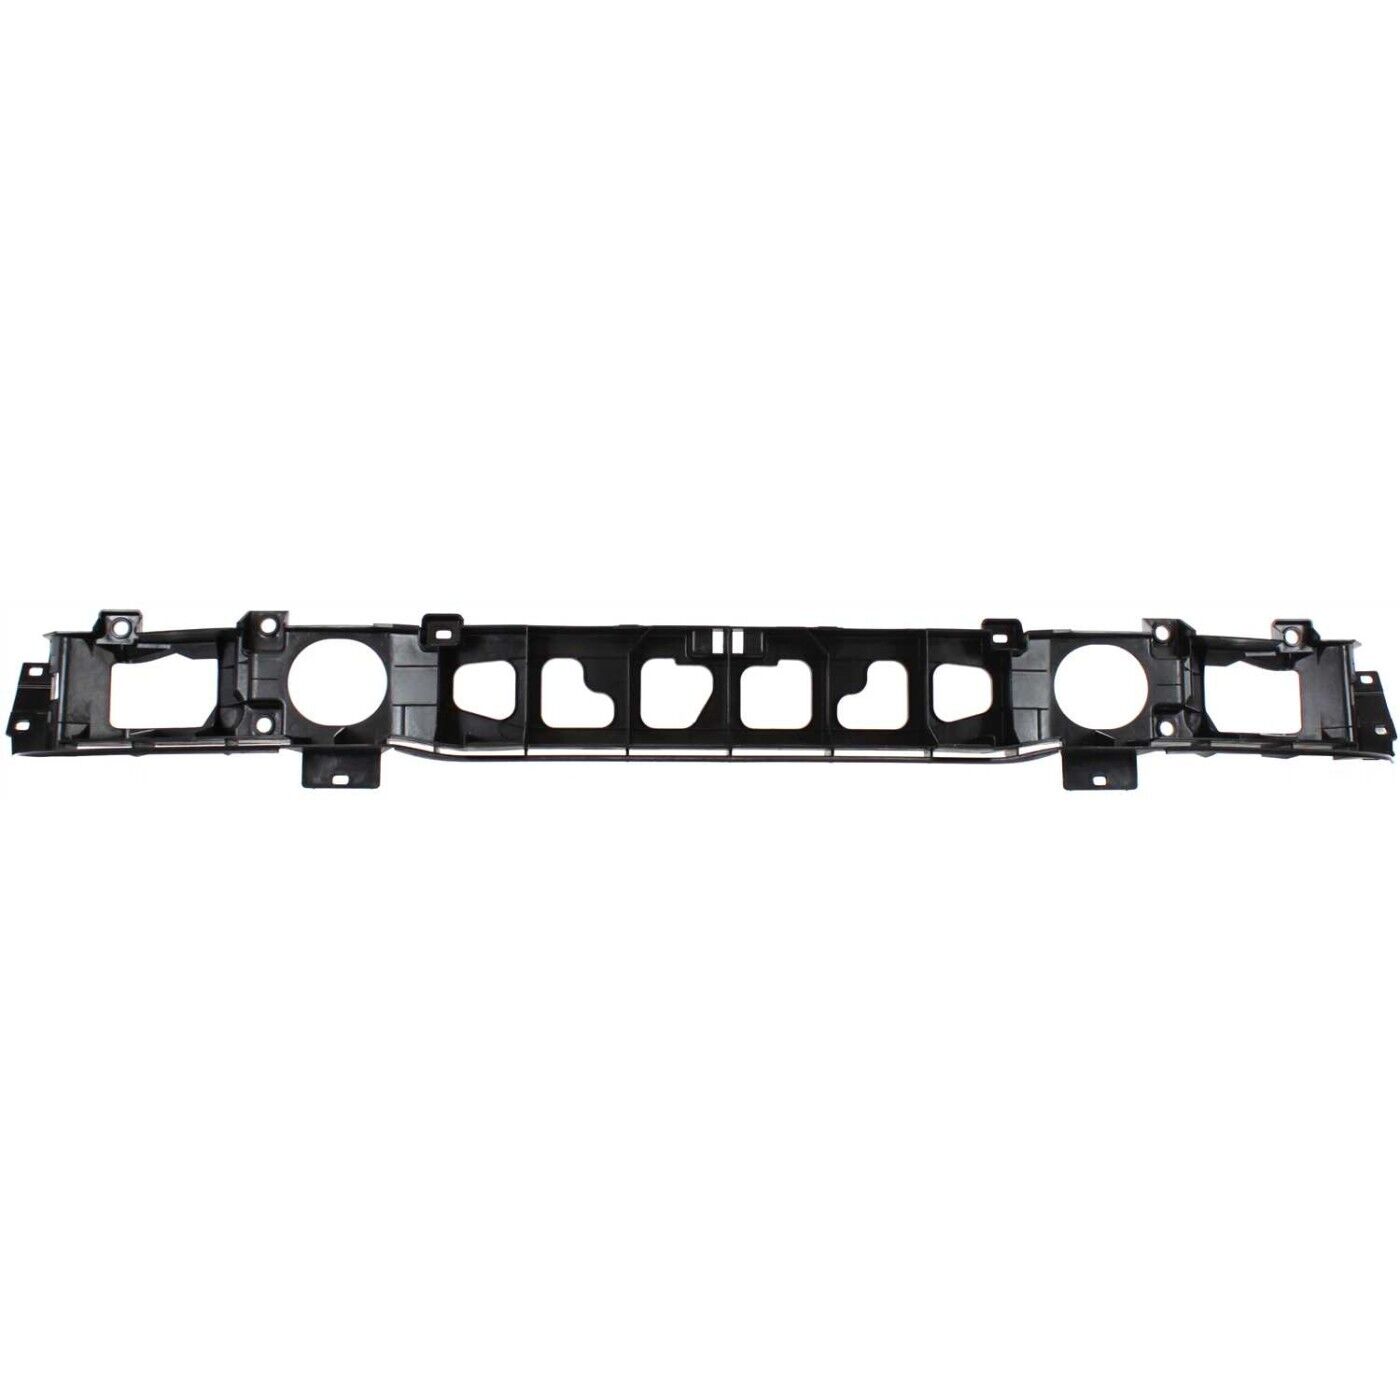 Header Panel For 92-95 Ford Taurus ABS Plastic